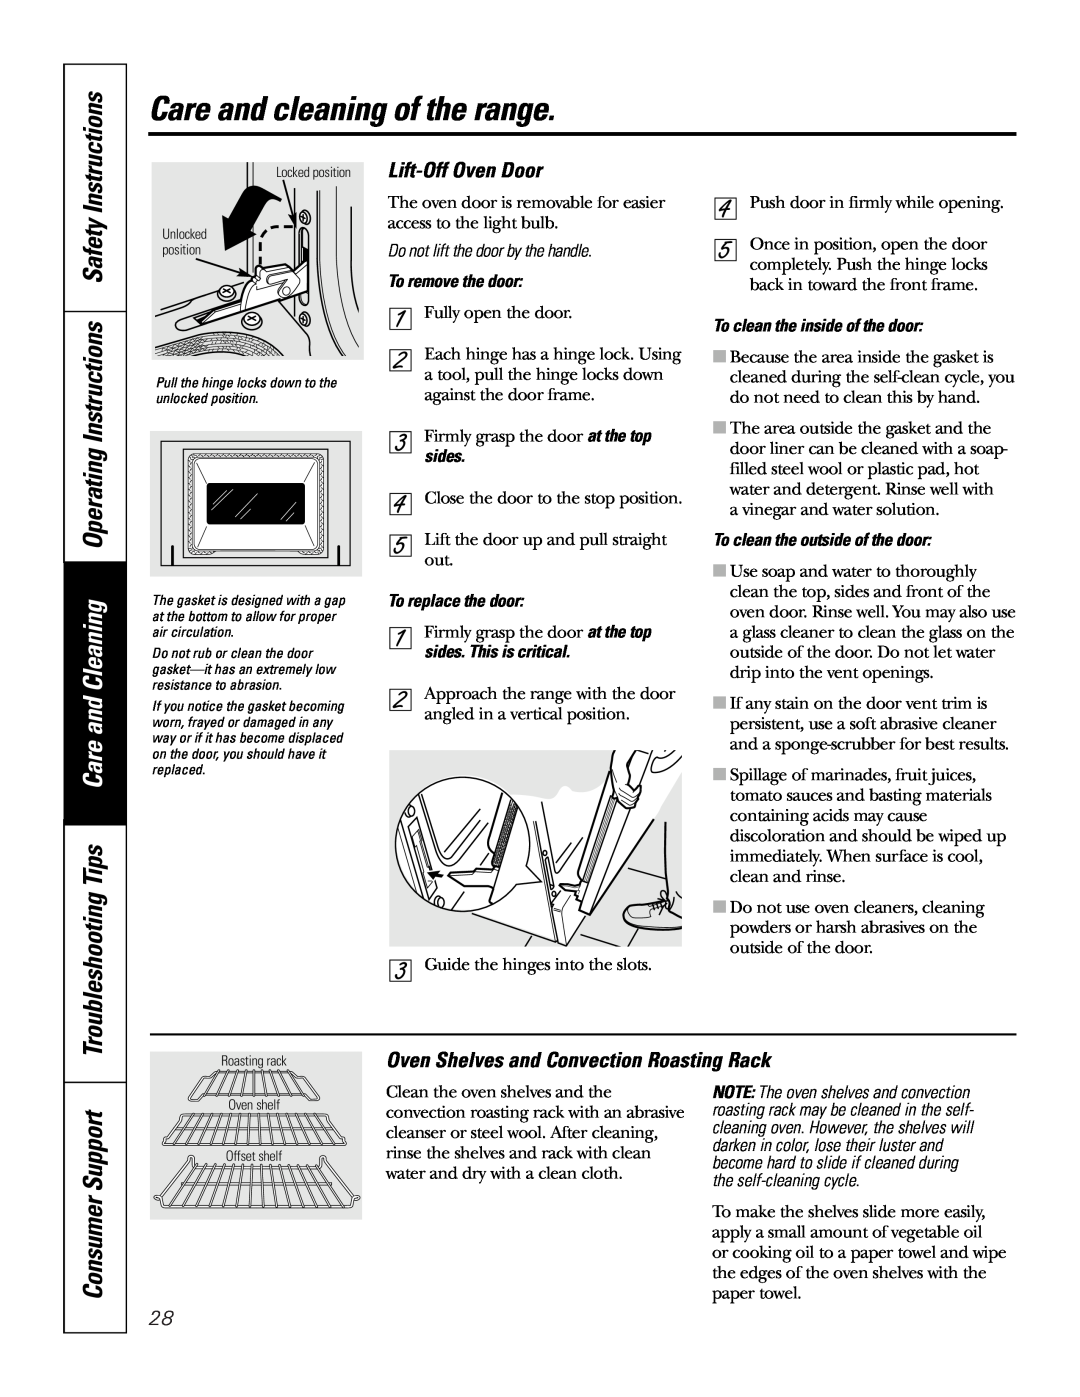 GE JB965 Troubleshooting Tips Care and Cleaning Operating Instructions Safety, Lift-Off Oven Door, Consumer Support 